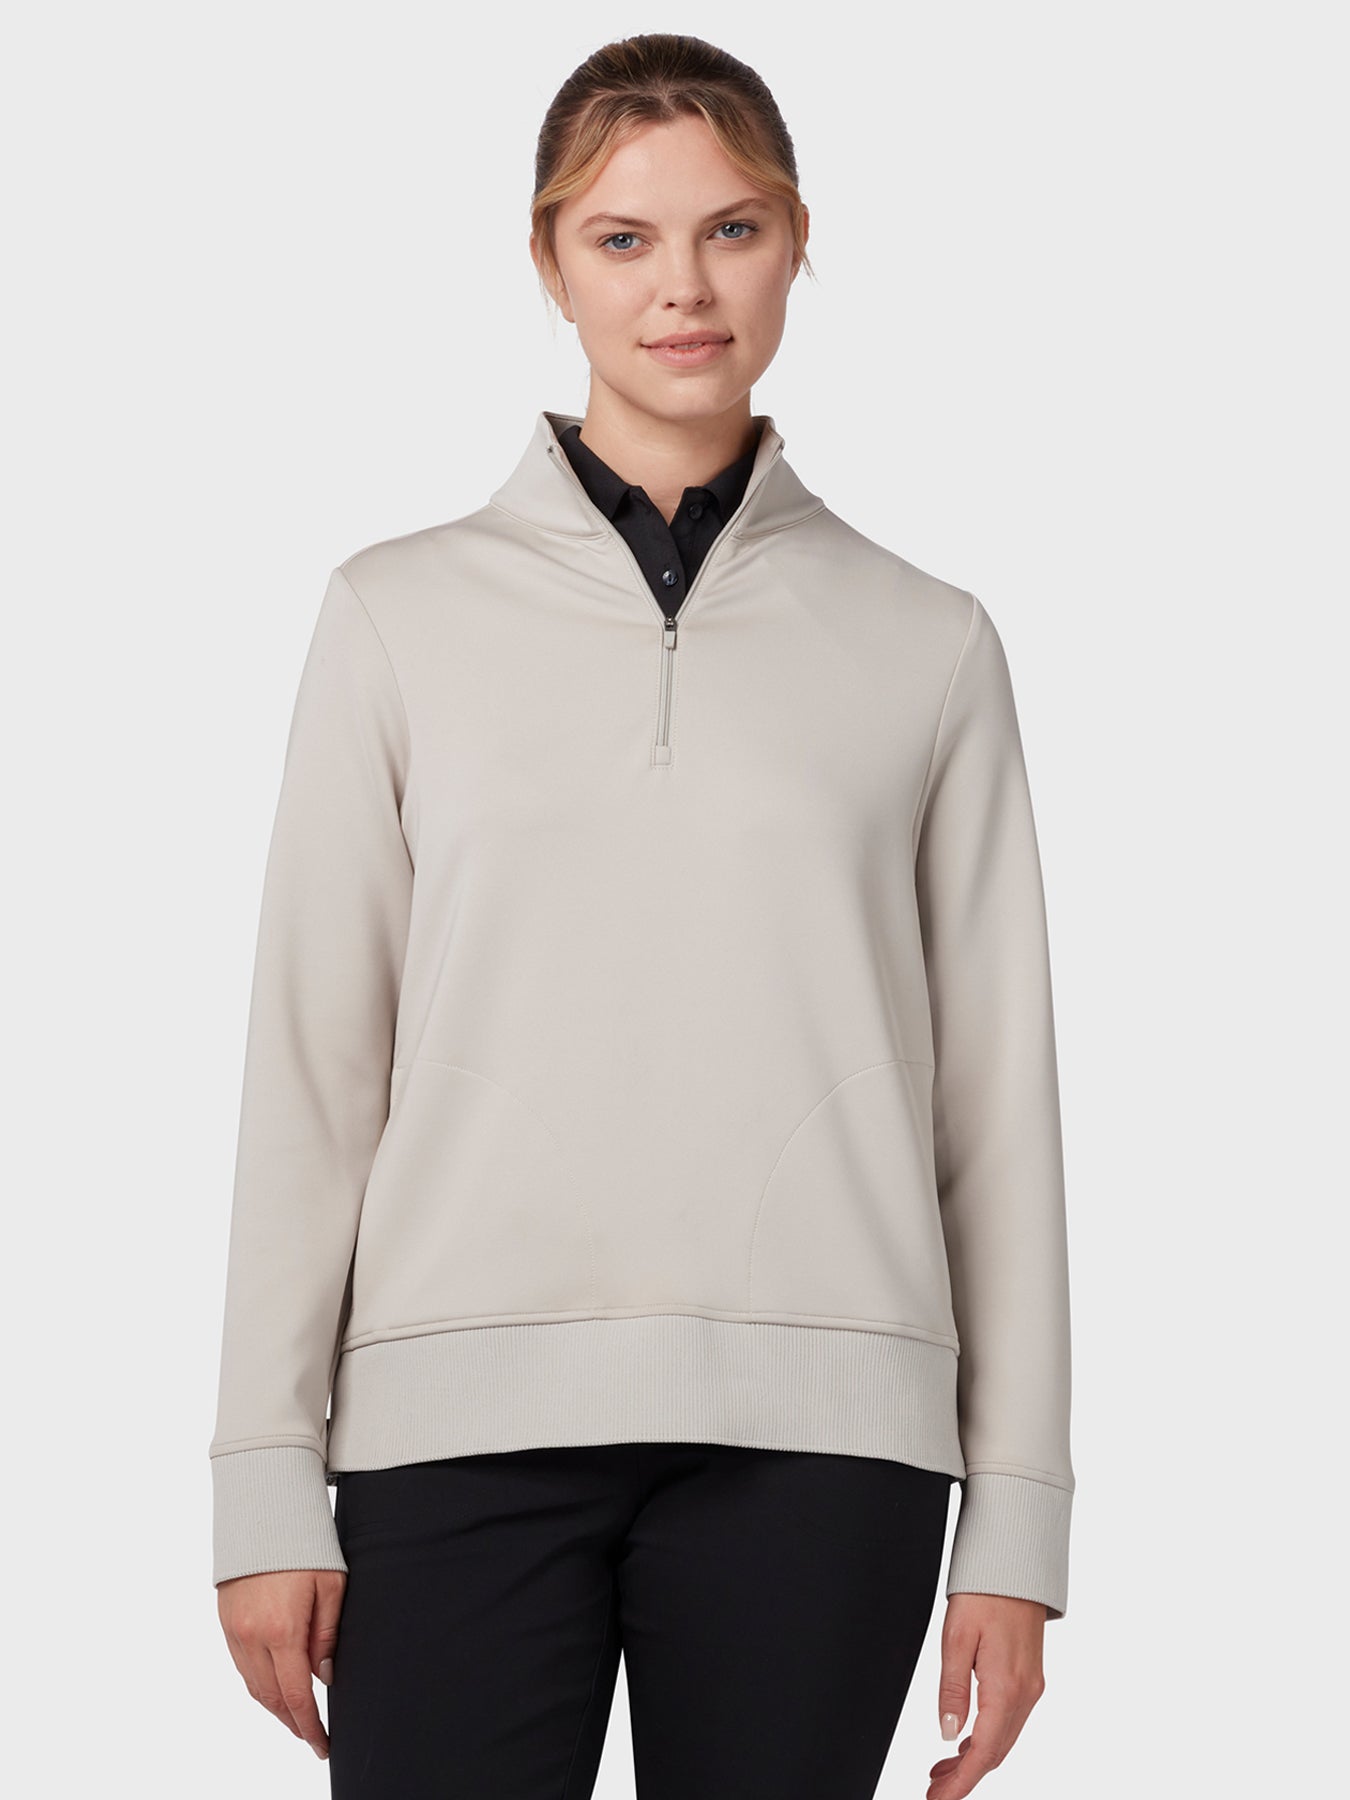 View Midweight Womens Fleece Crossover In Chateau Grey Chateau Grey XS information